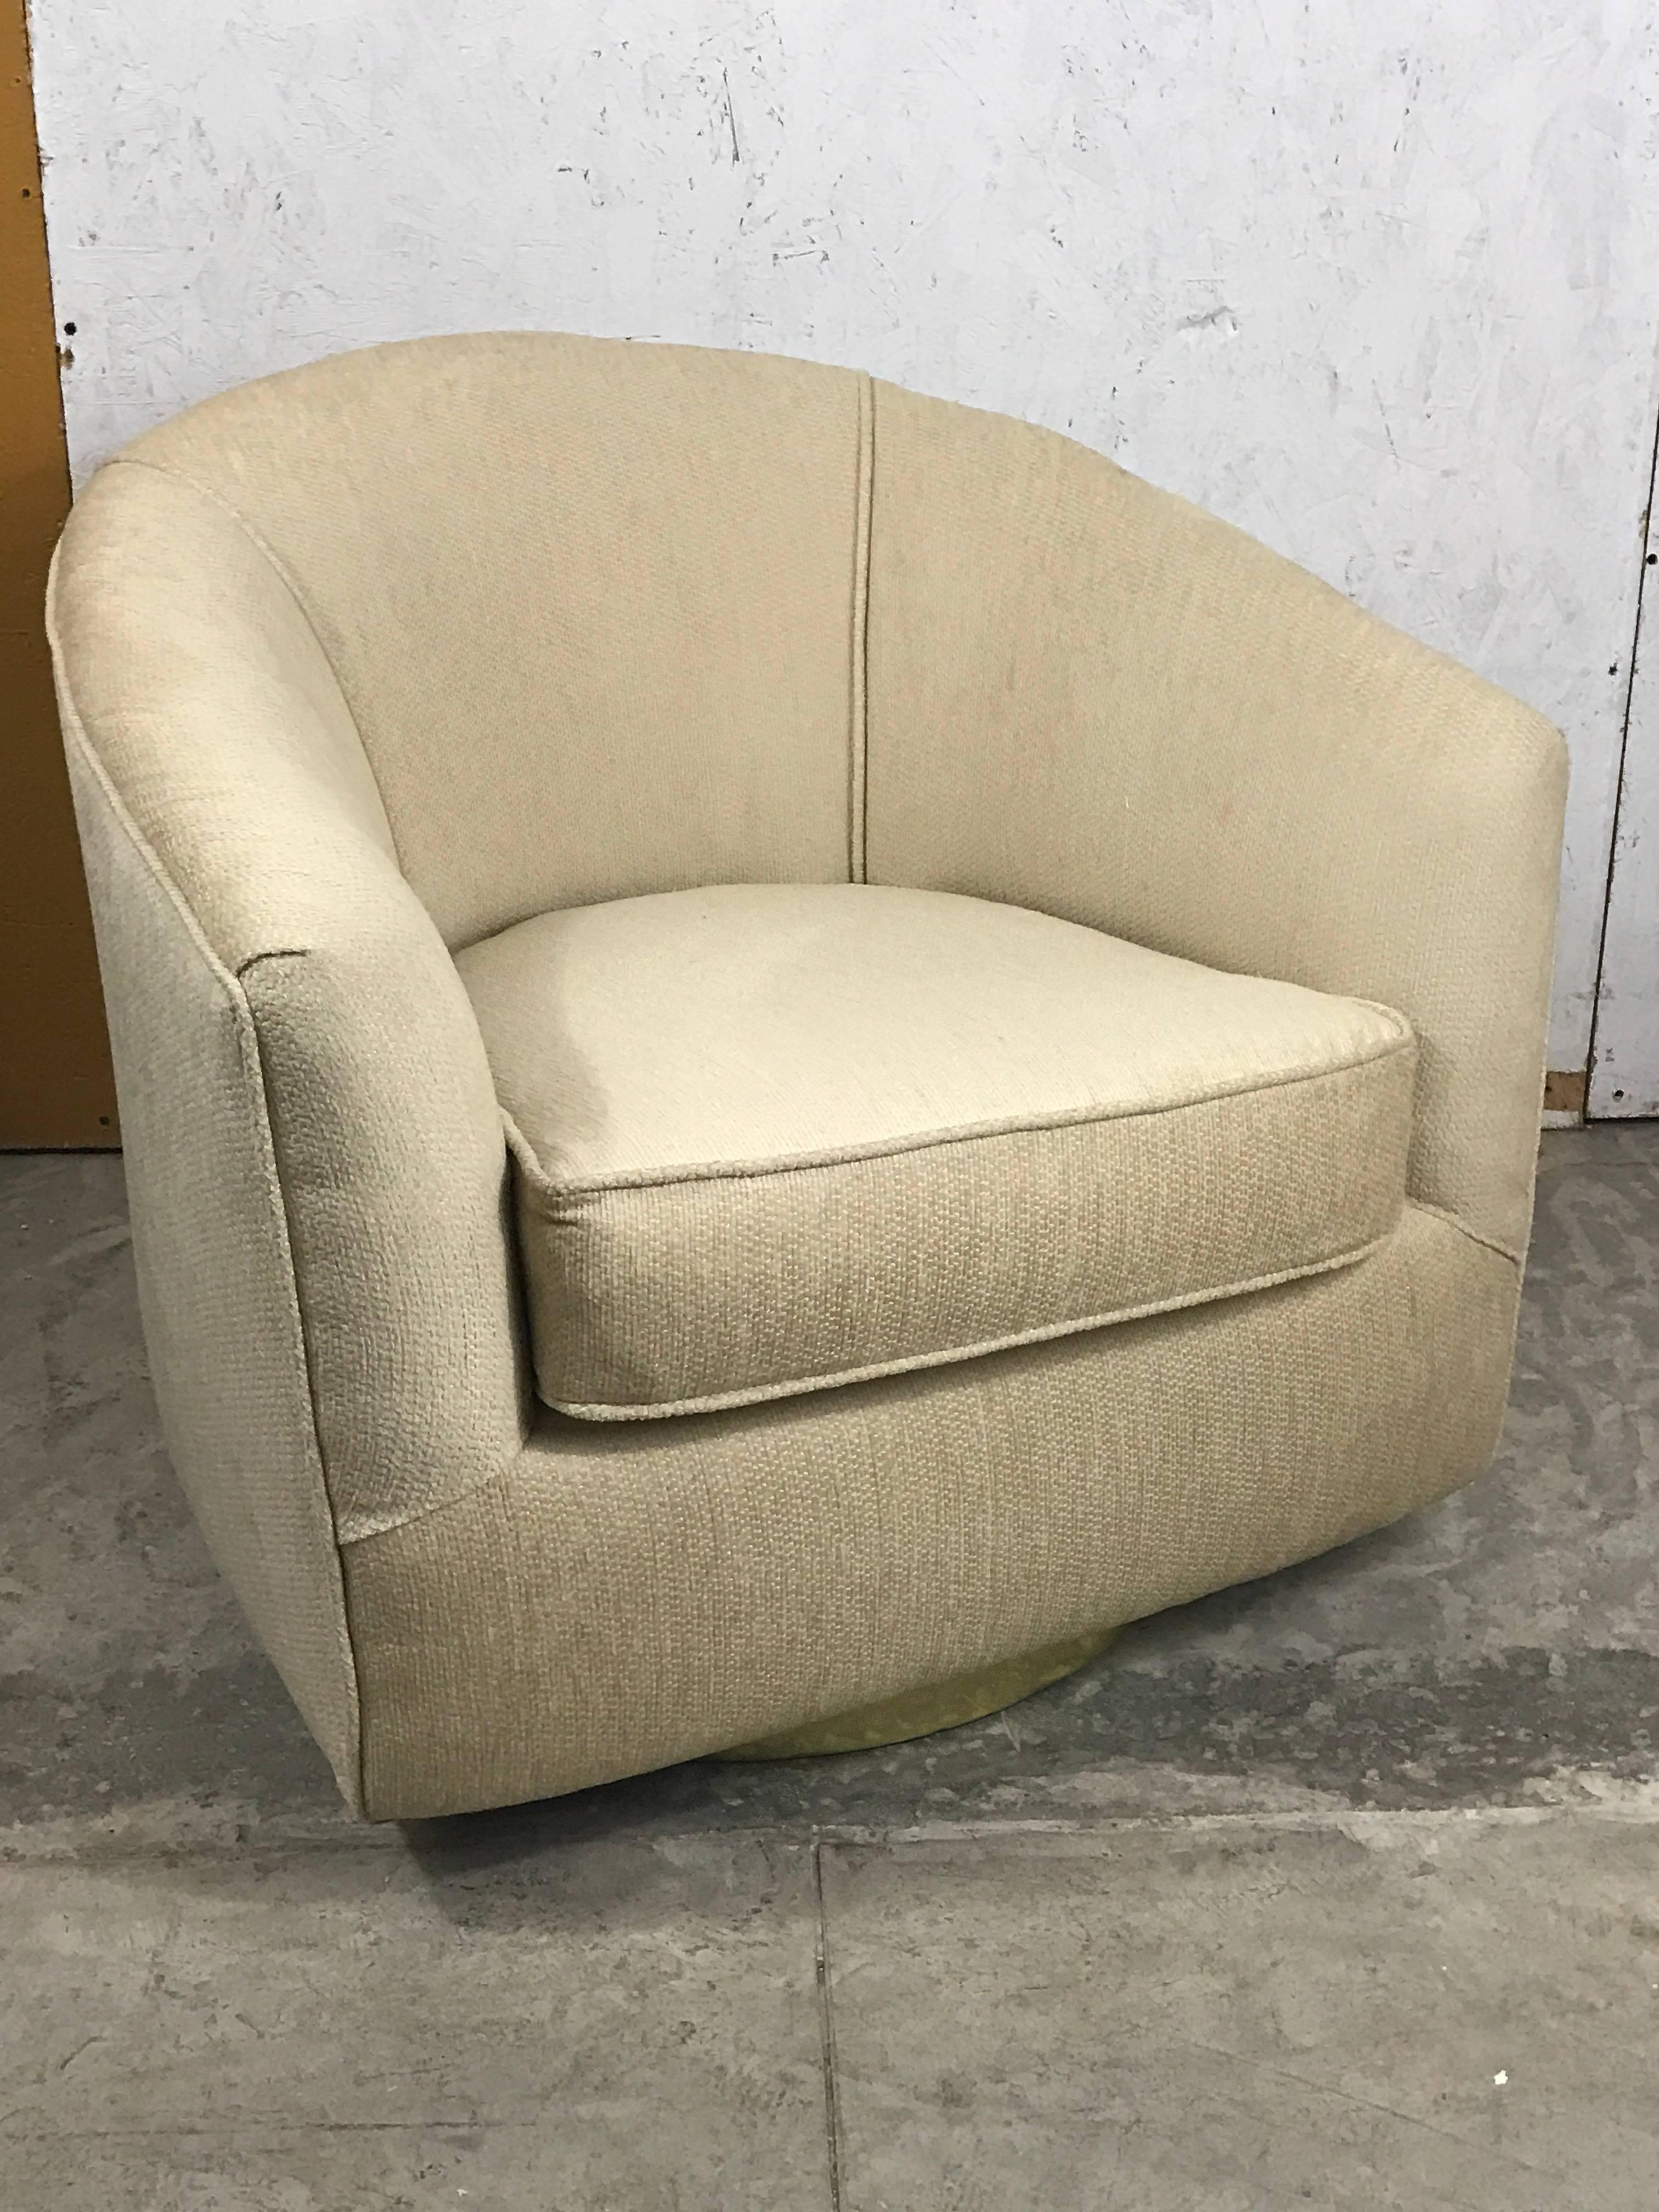 Pair of Milo Baughman swivel chairs, Each one with circular brass base.

Measures: 33” H x 30.5 D x 26.5” with 17.5” seat height (24” inside arm to arm).